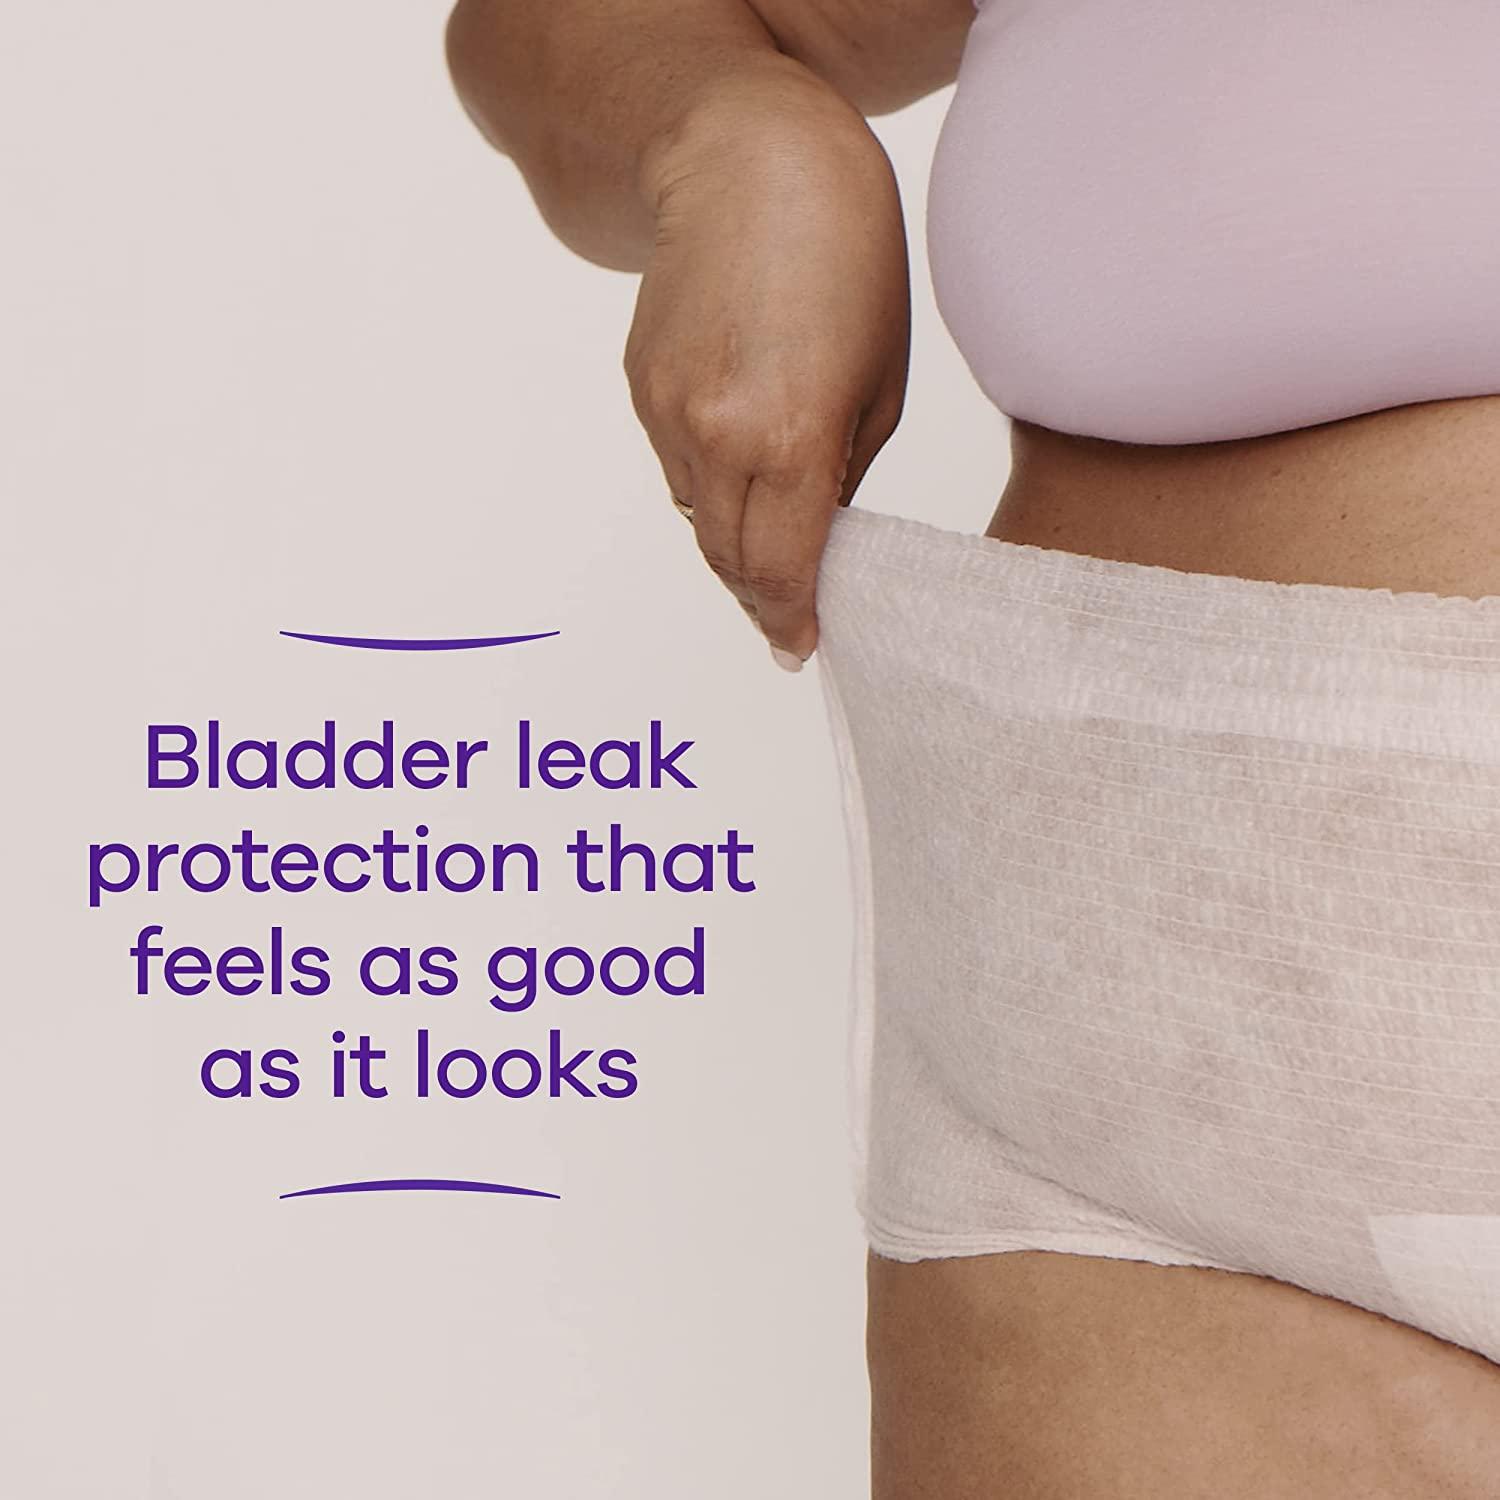 Always Discreet Adult Incontinence Max Protection Underwear, Sm